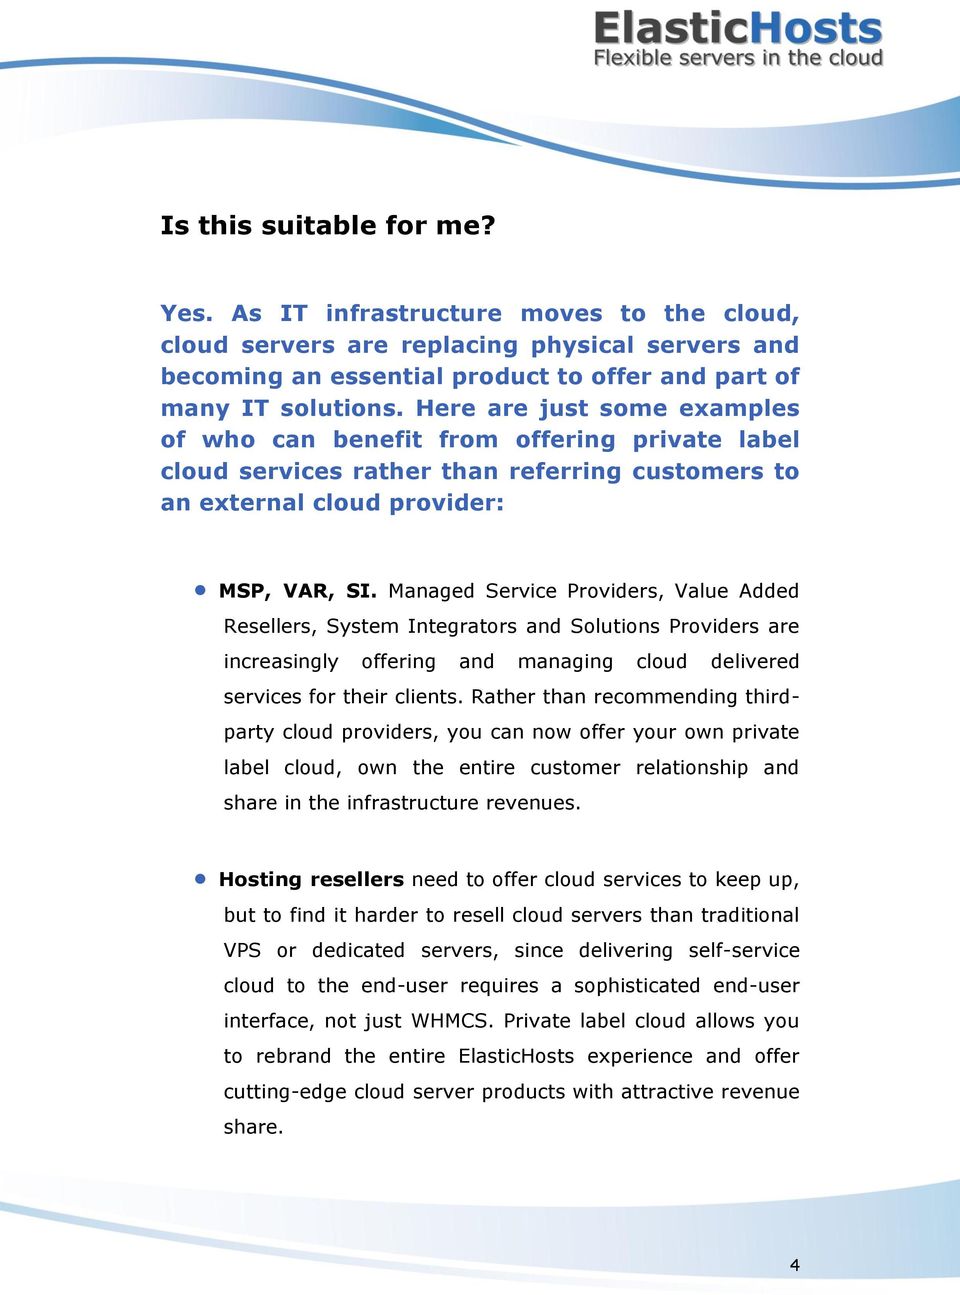 Managed Service Providers, Value Added Resellers, System Integrators and Solutions Providers are increasingly offering and managing cloud delivered services for their clients.